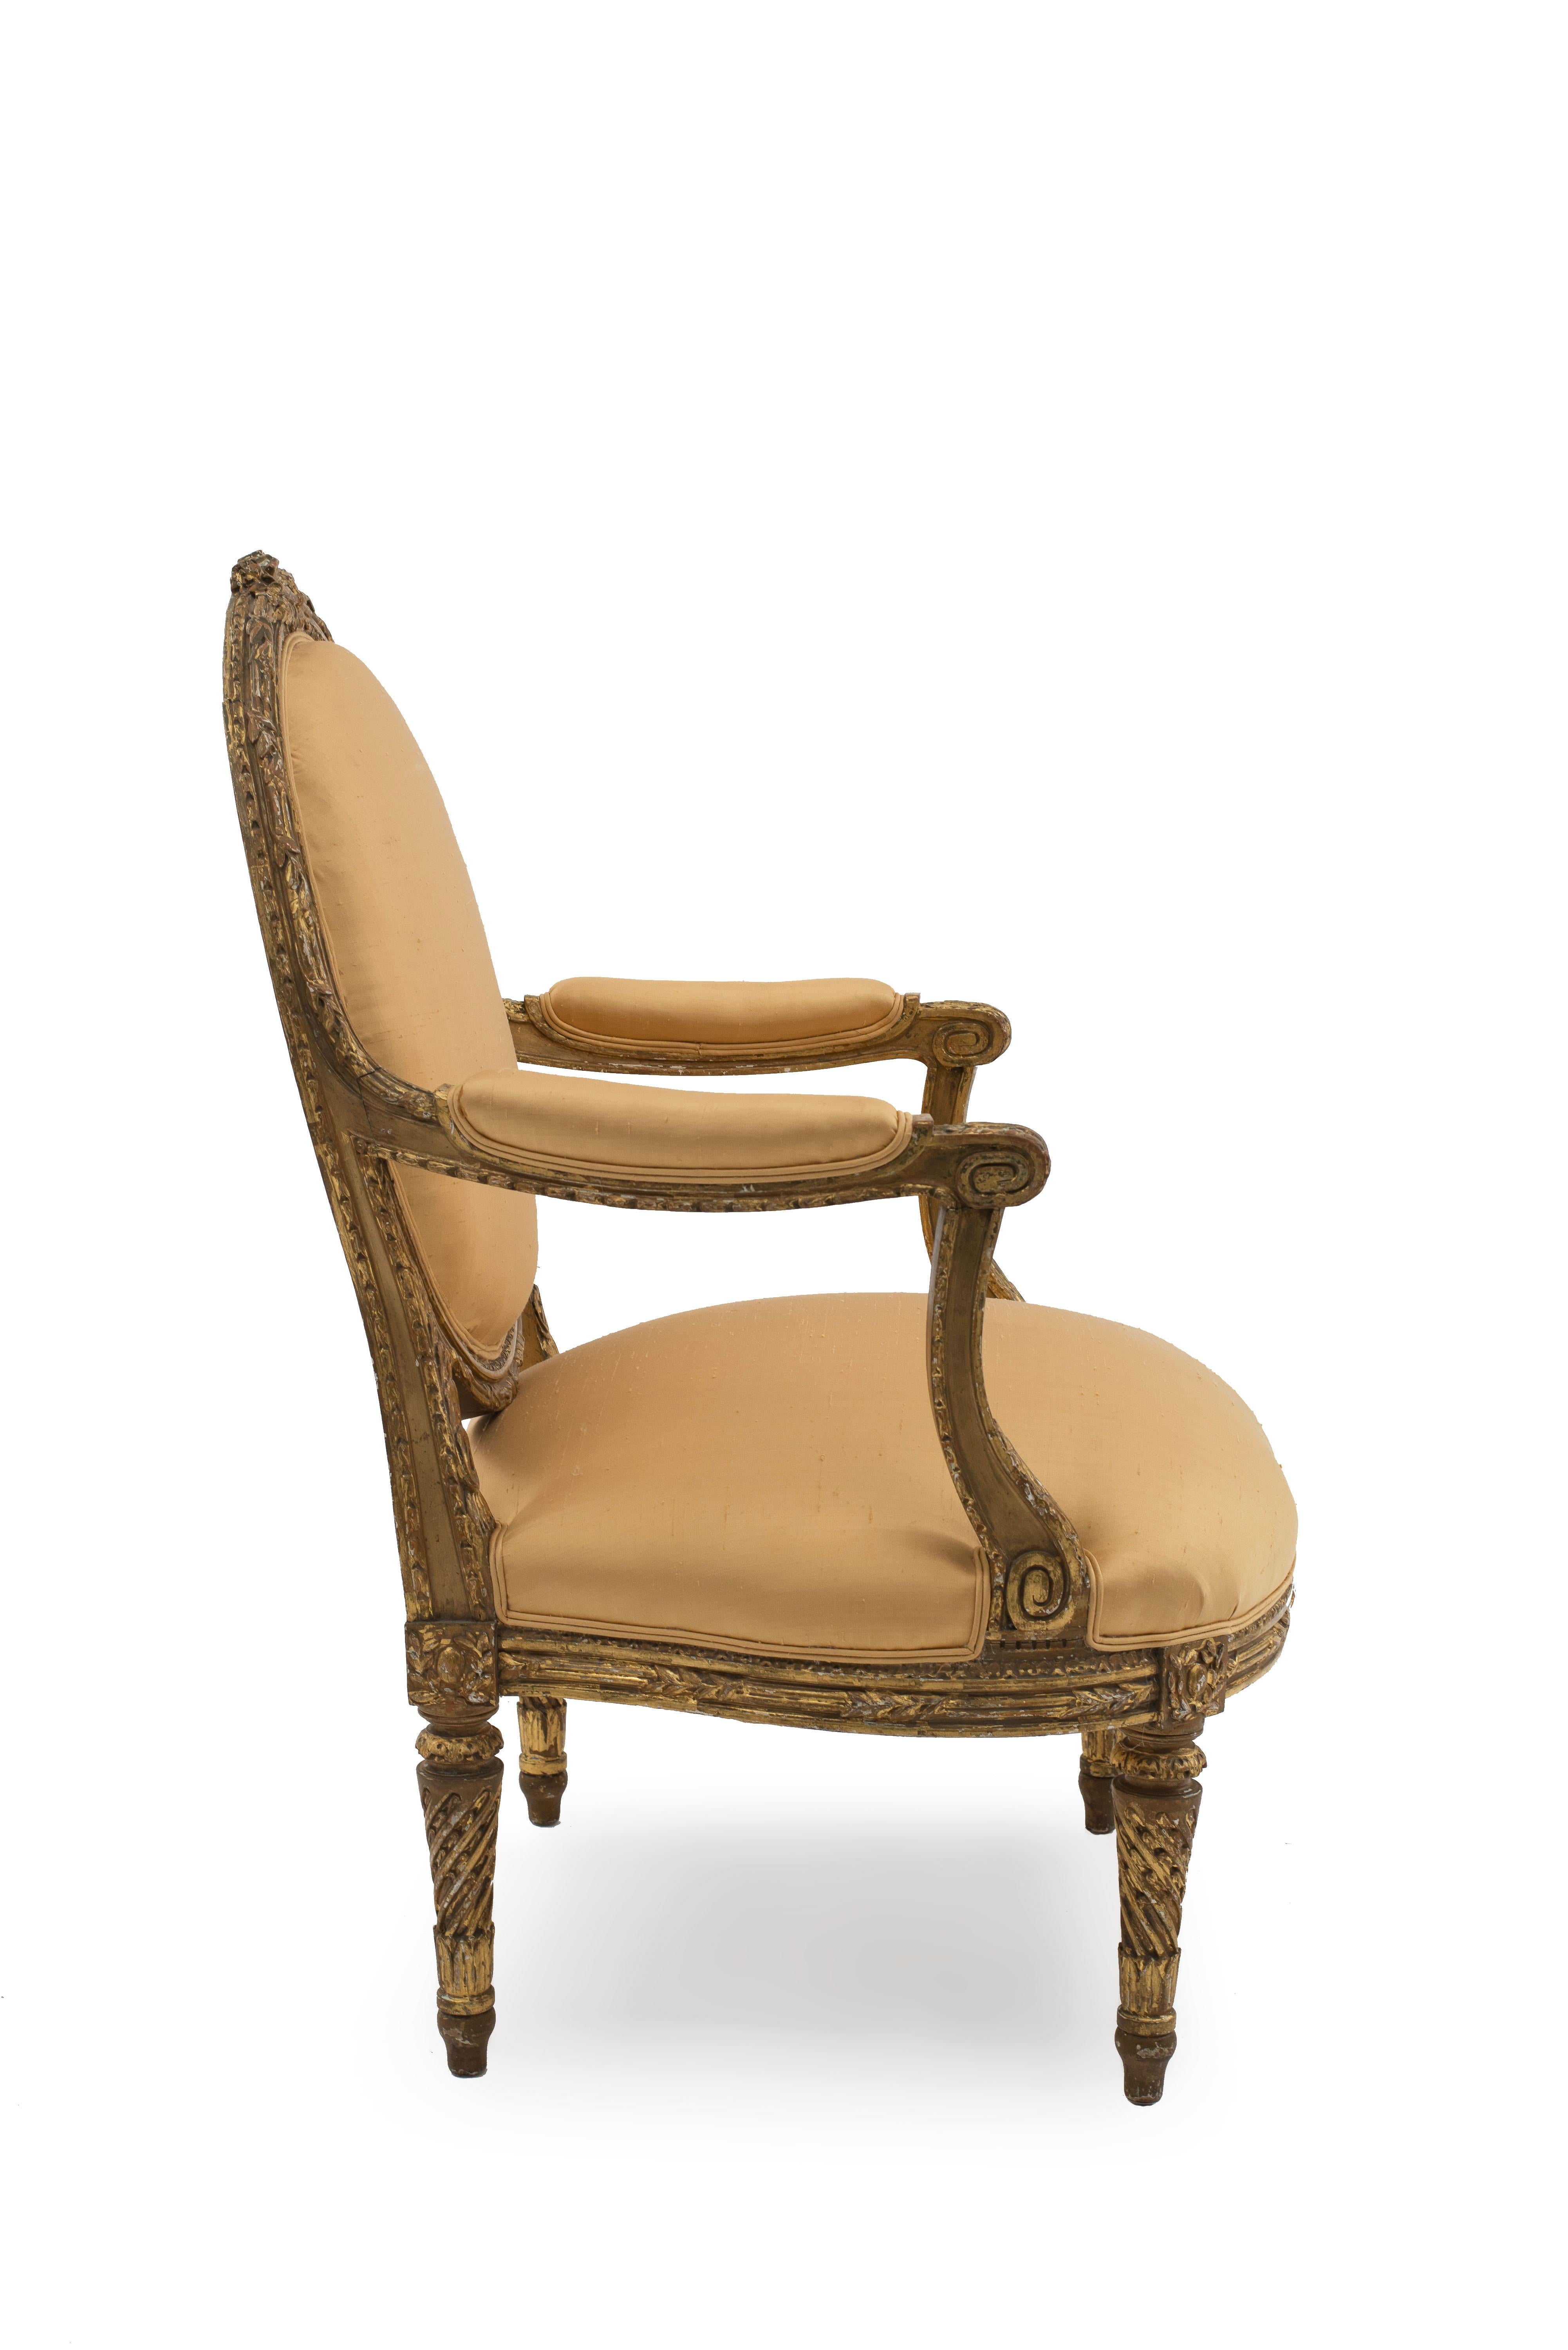 20th Century Pair of Louis XVI-Style Oval Back Armchairs